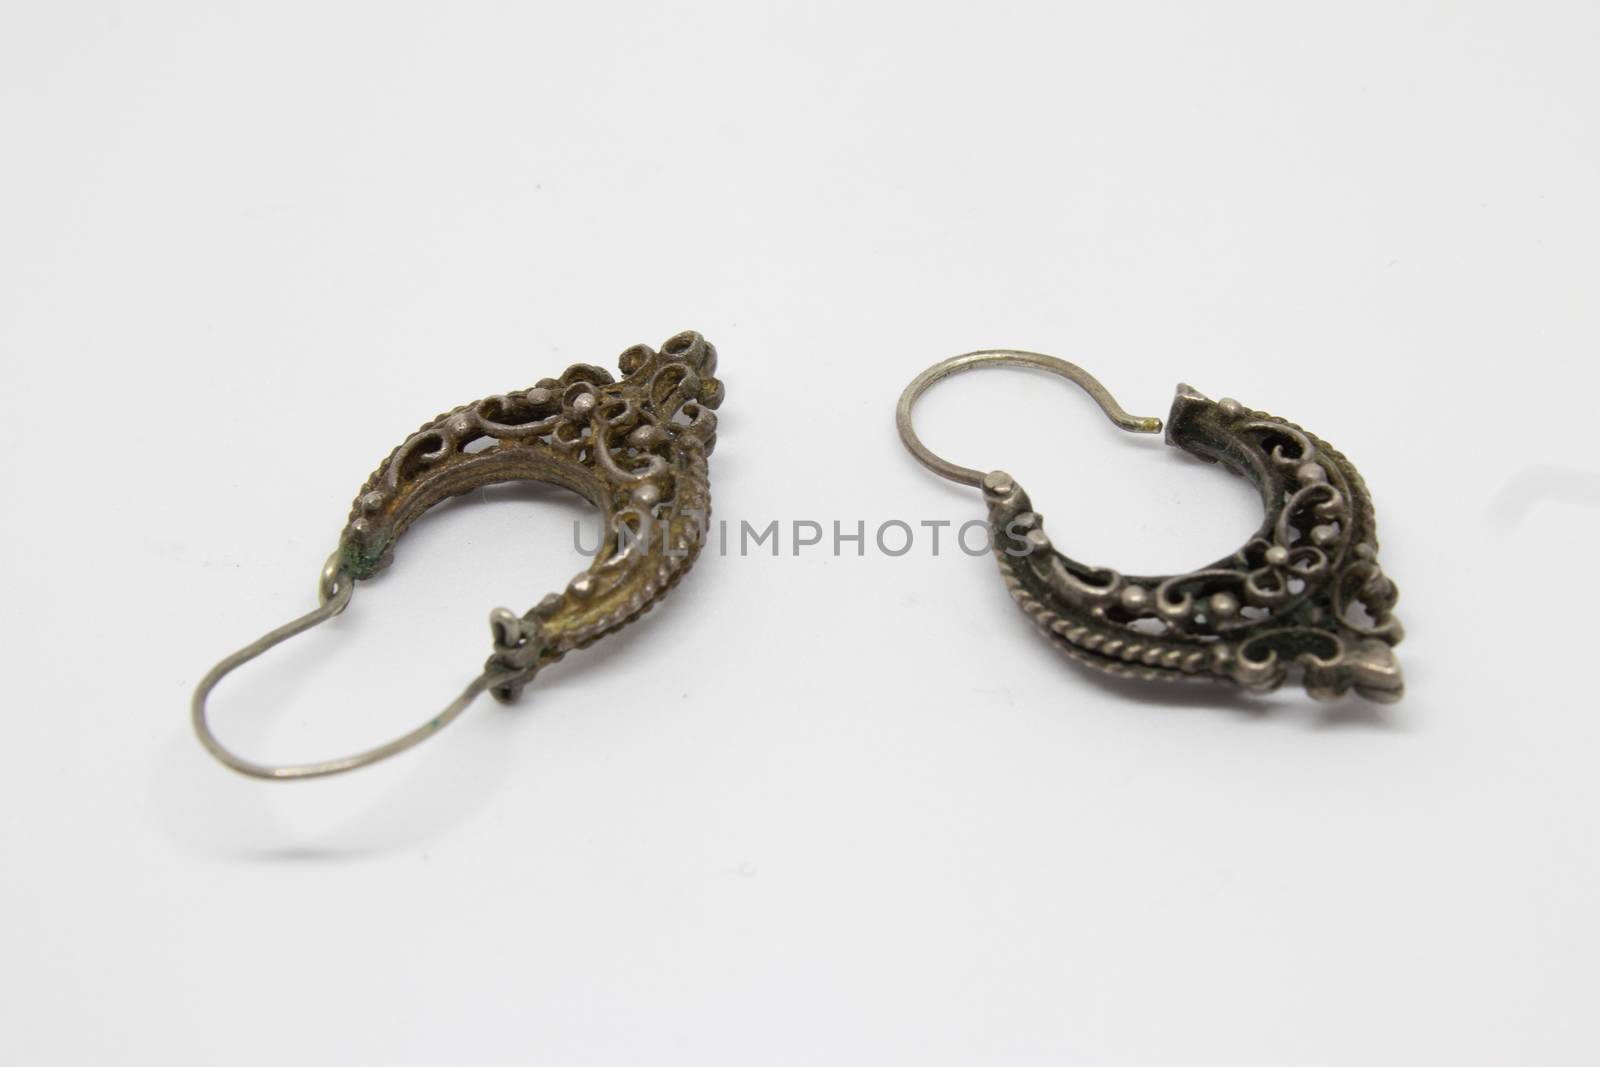 a pair of antique silver earrings closeup. photo has taken with photobox with white background.